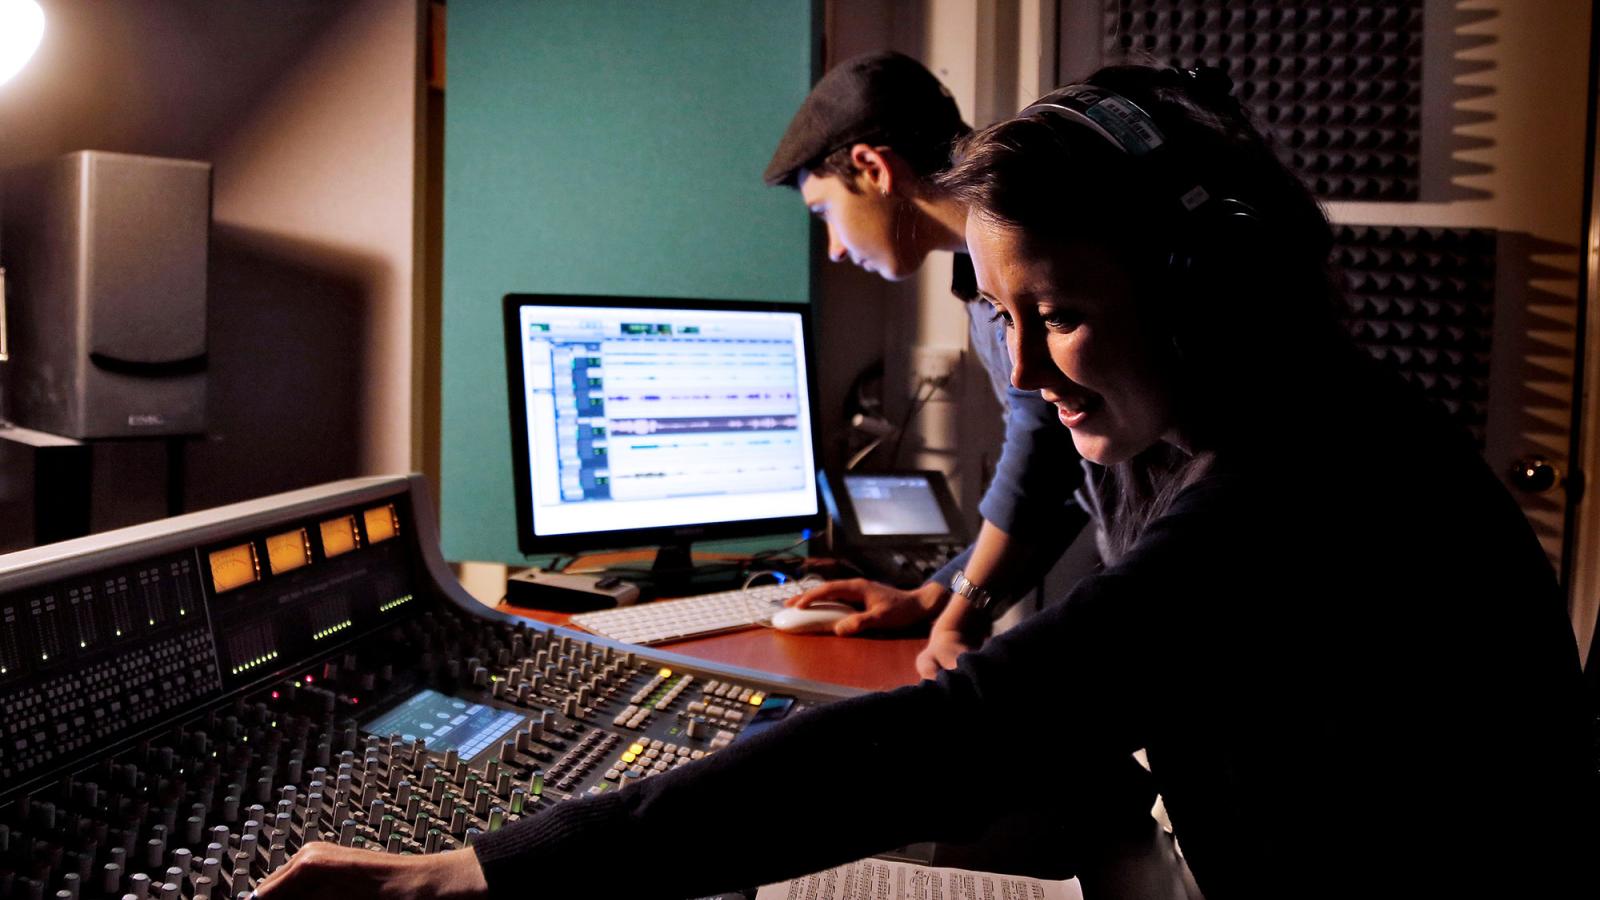 Two music students working on mixers and computers in a recording room.